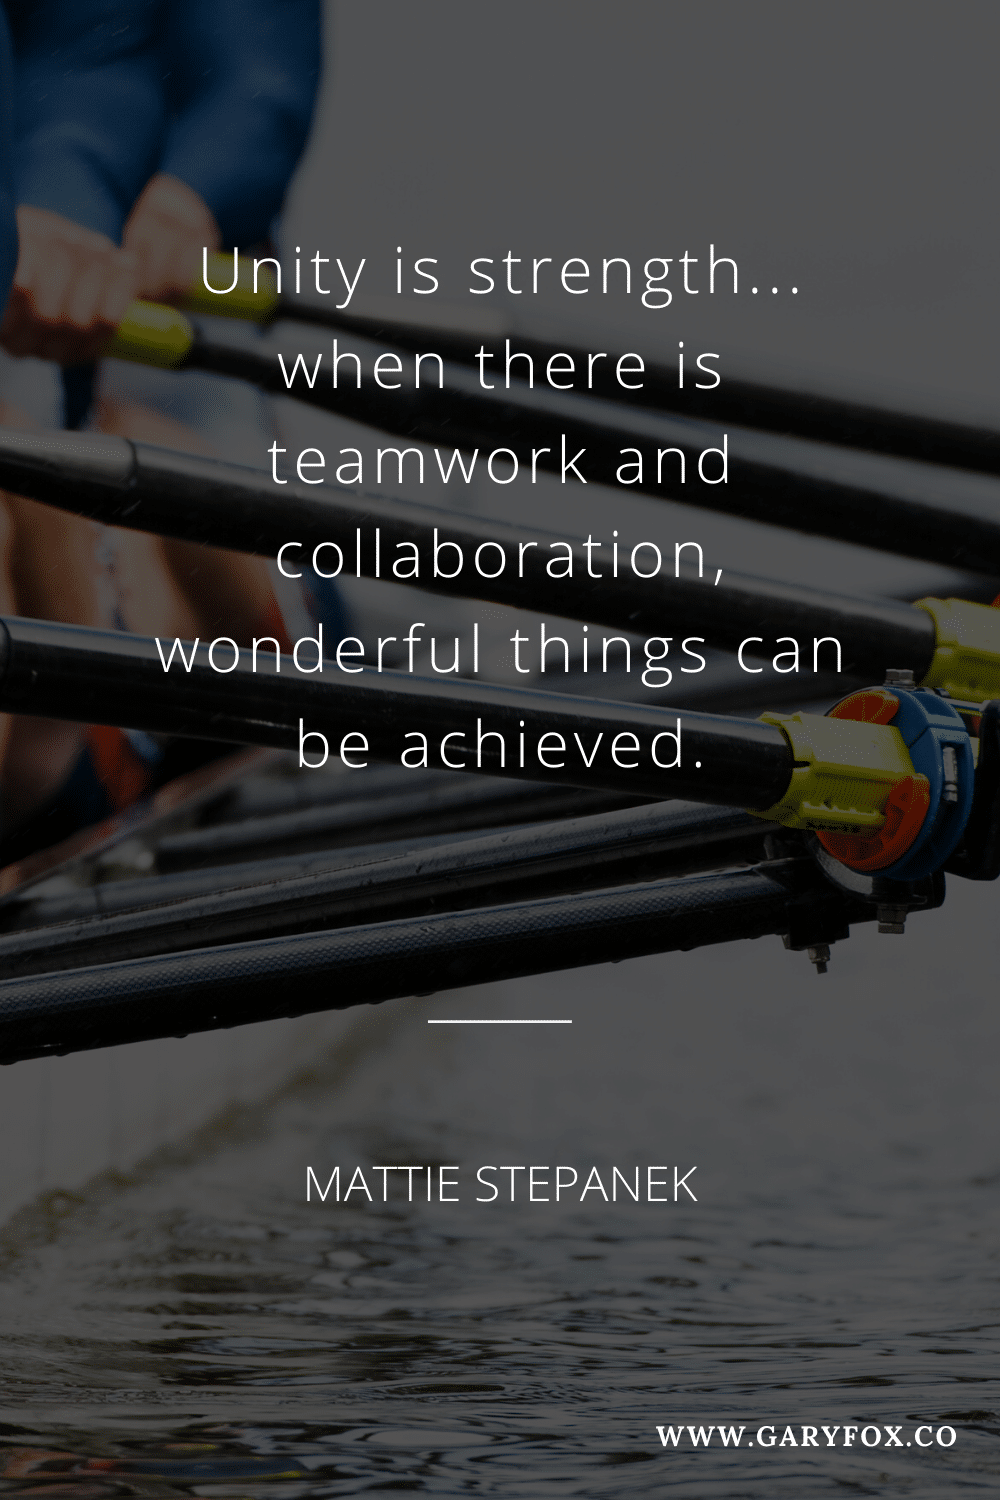 Unity Is Strength When There Is Teamwork And Collaboration, Wonderful Things Can Be Achieved. - Mattie Stepanek